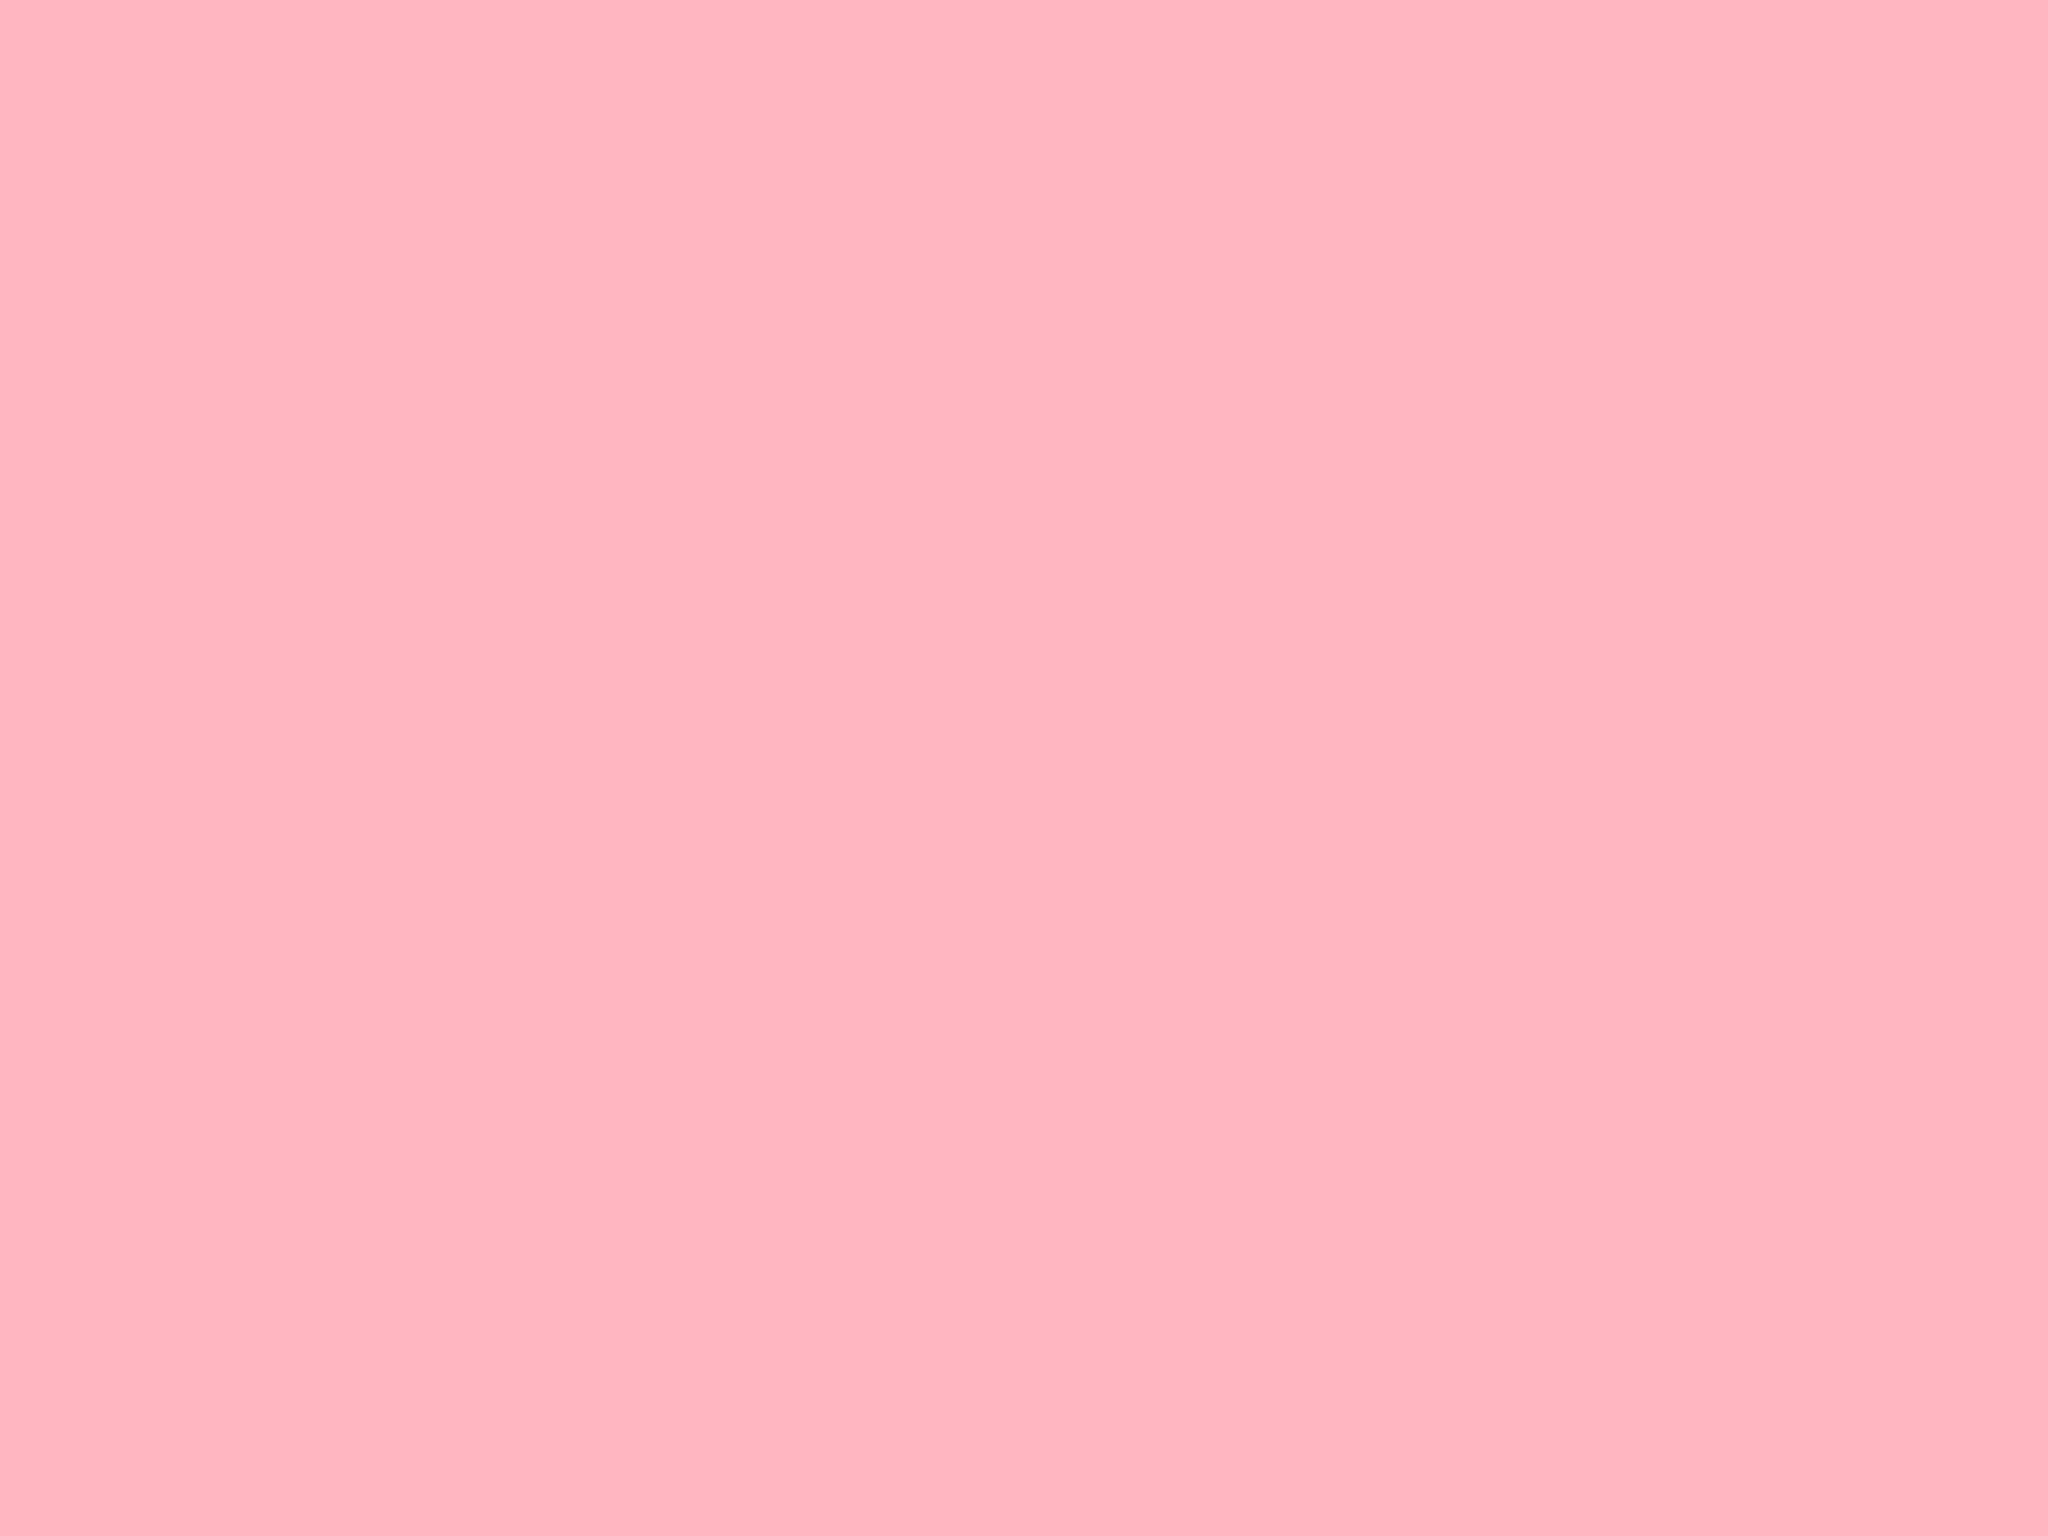 Pink Ombre Wallpaper 60 Images